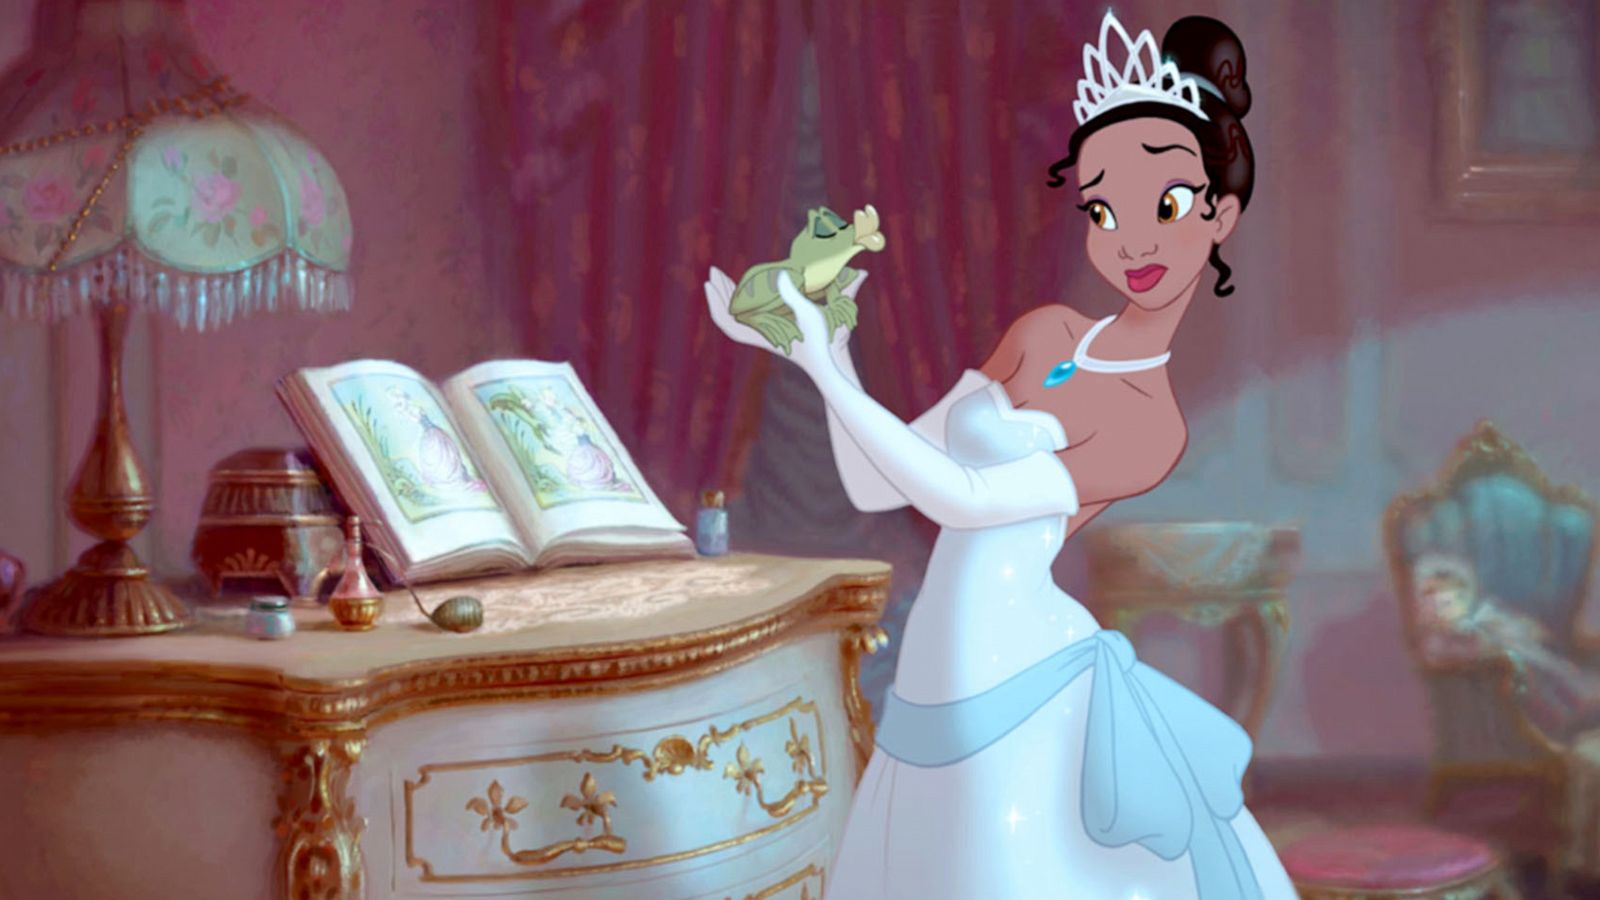 PHOTO: Anika Noni Rose voices Princess Tiana in "The Princess and the Frog".